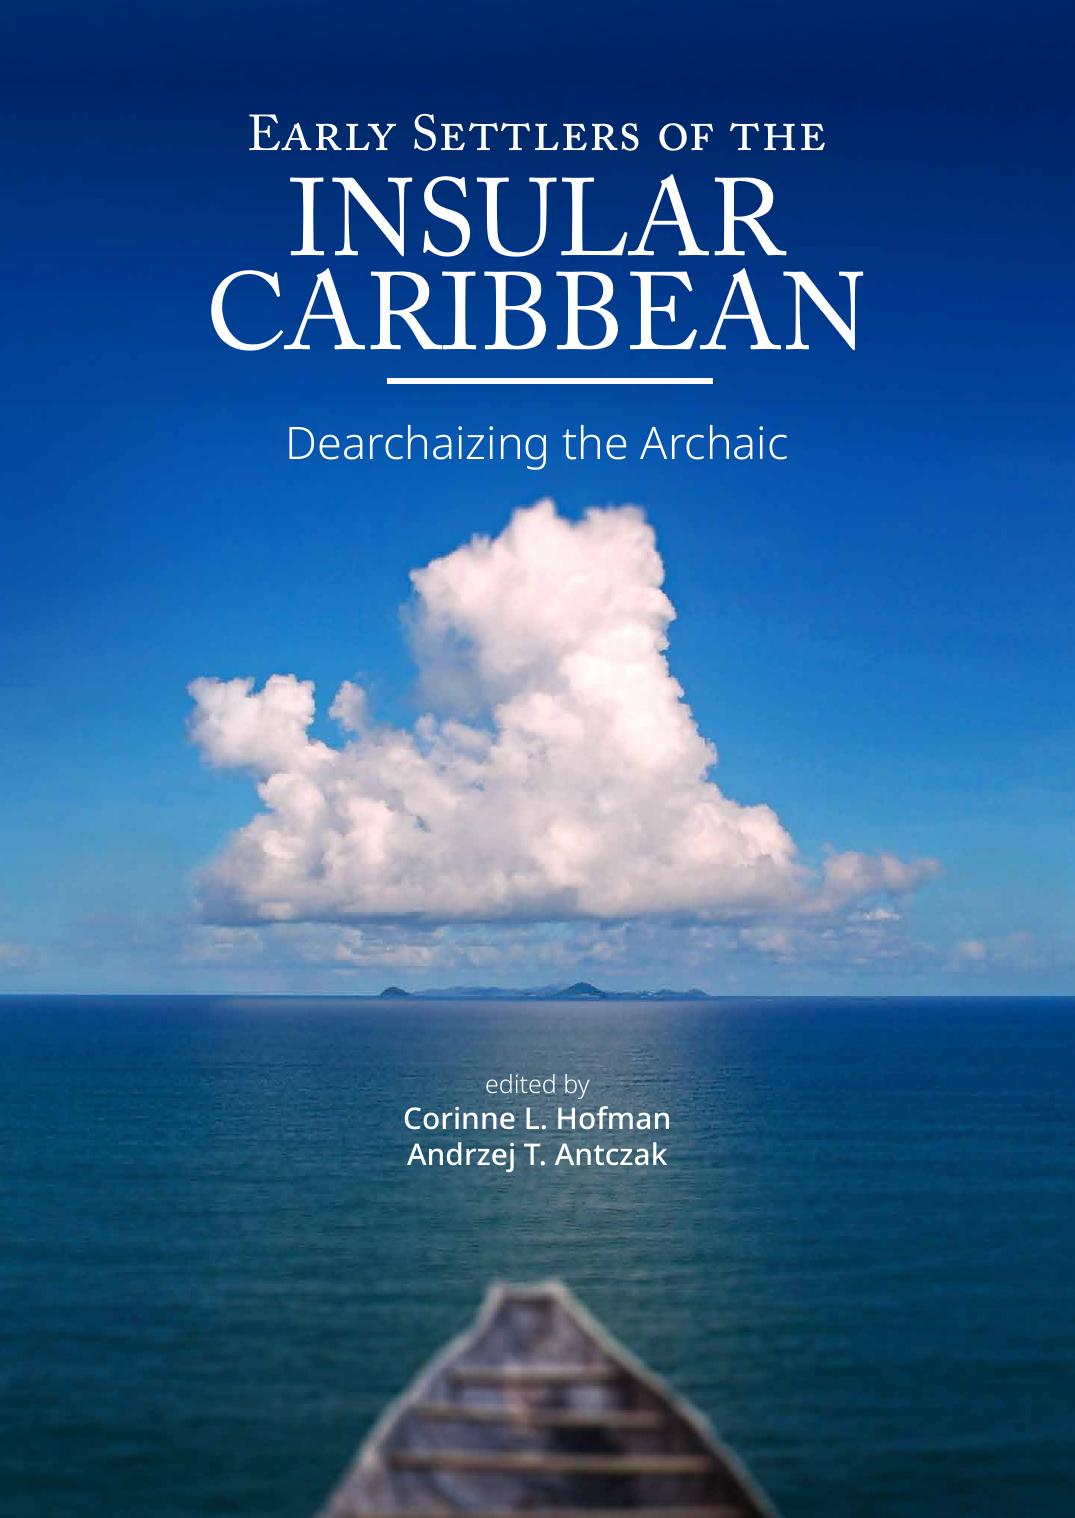 Early Settlers of the Insular Caribbean: Dearchaizing the Archaic by Corinne Hofman; Andrzej Antczak